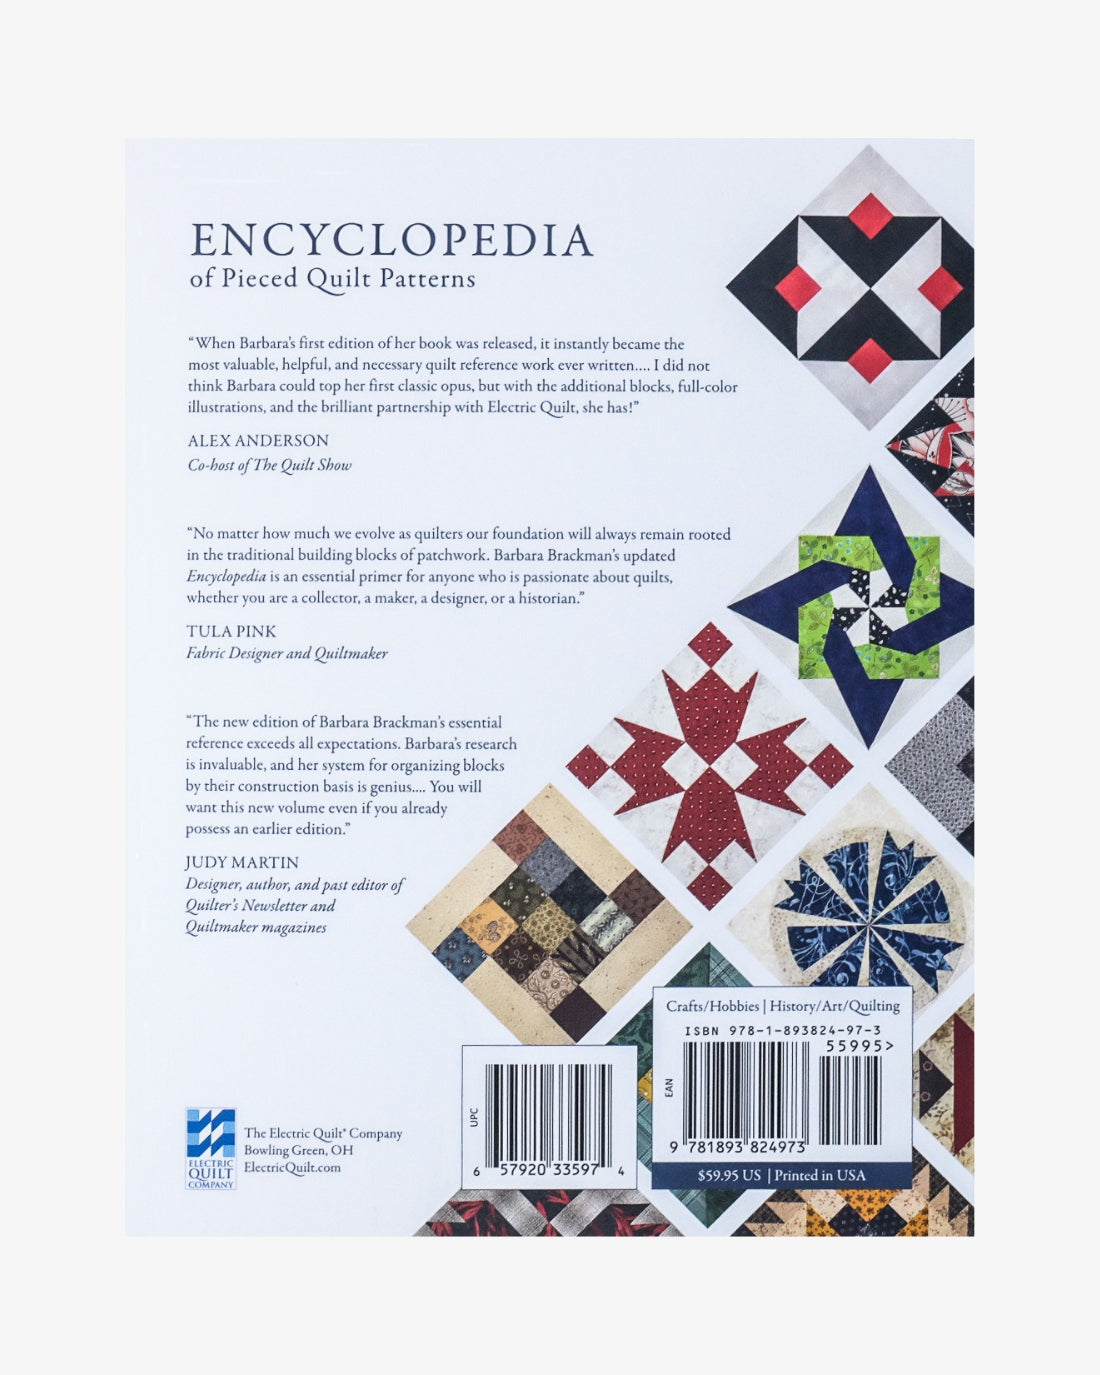 The Encyclopedia of Pieced Quilt Patterns by Barbara Brackman